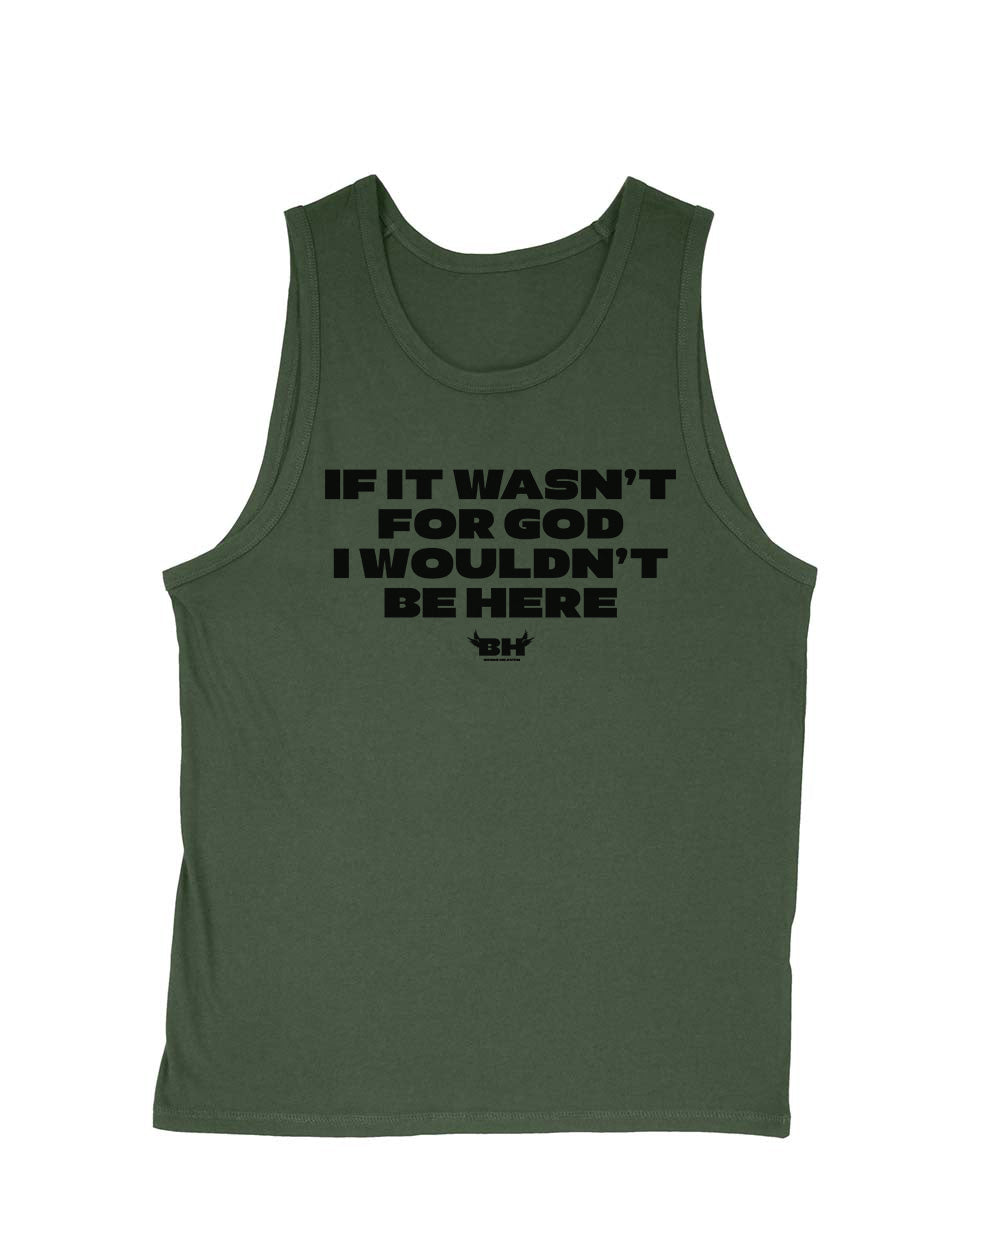 Men's | Wouldn't Be Here | Tank Top